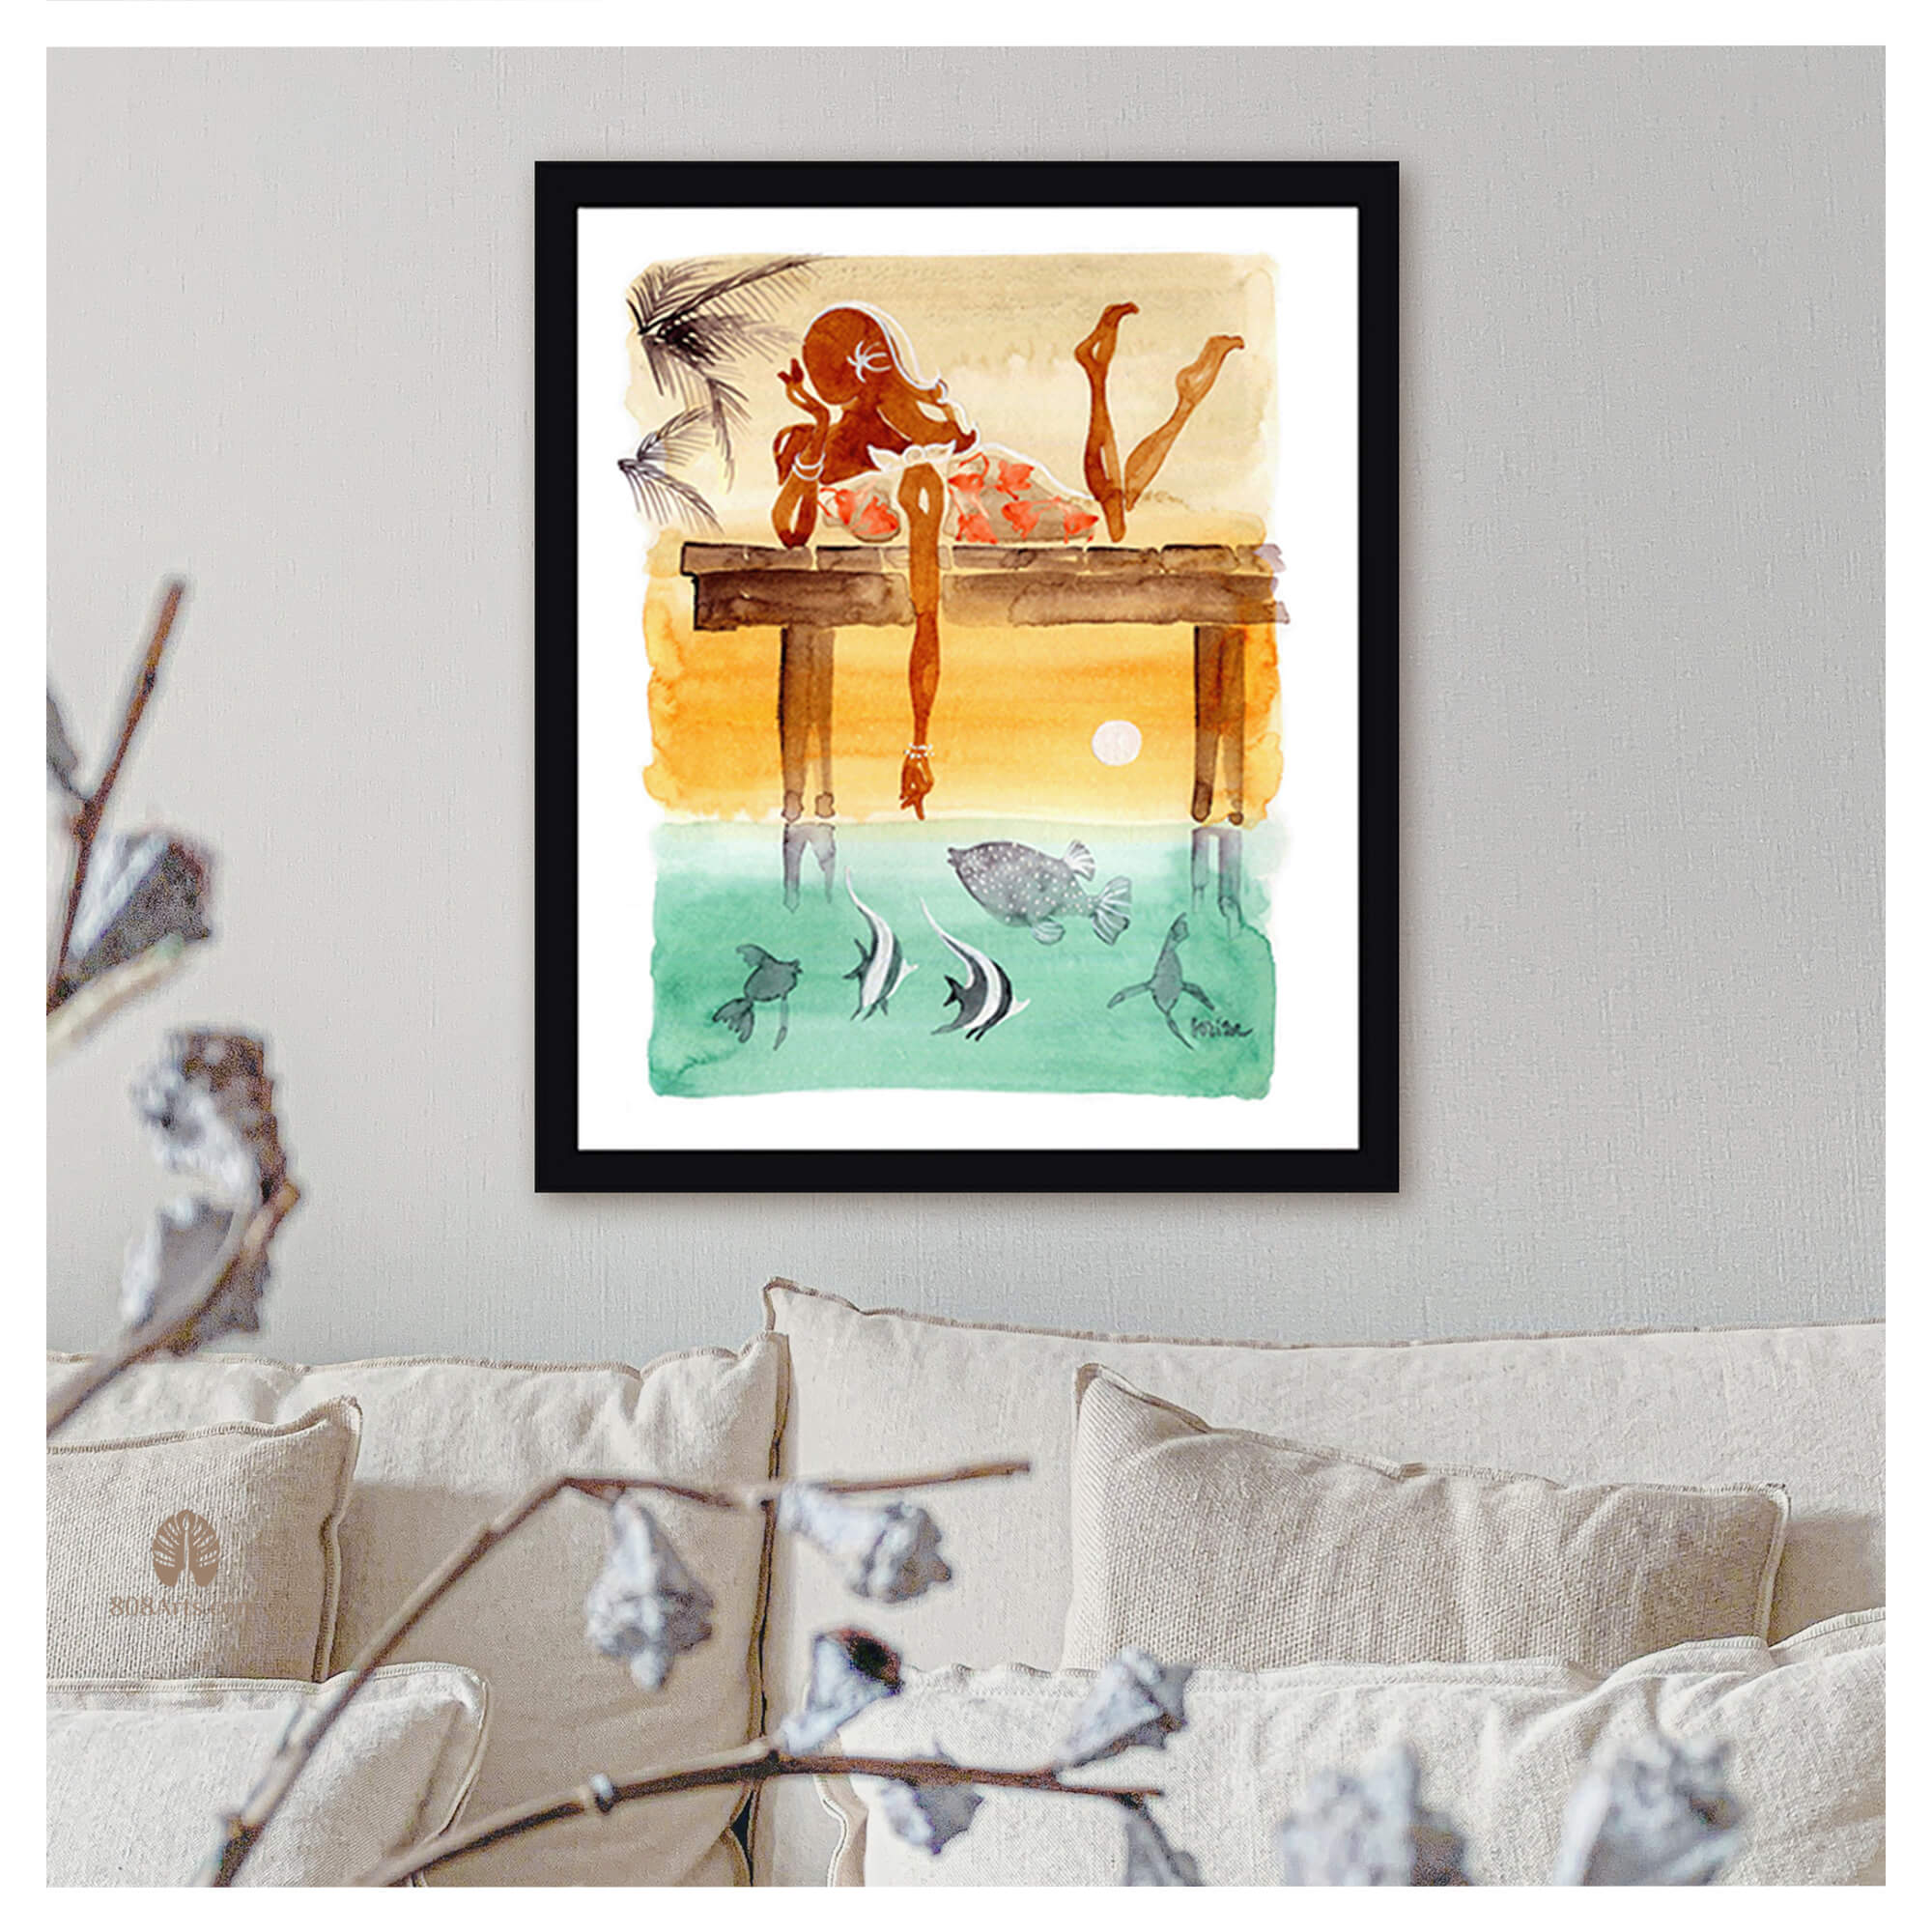 Framed paper giclée print of a watercolor artwork featuring a woman enjoying the colorful sunset by Hawaii artist Lovisa Oliv